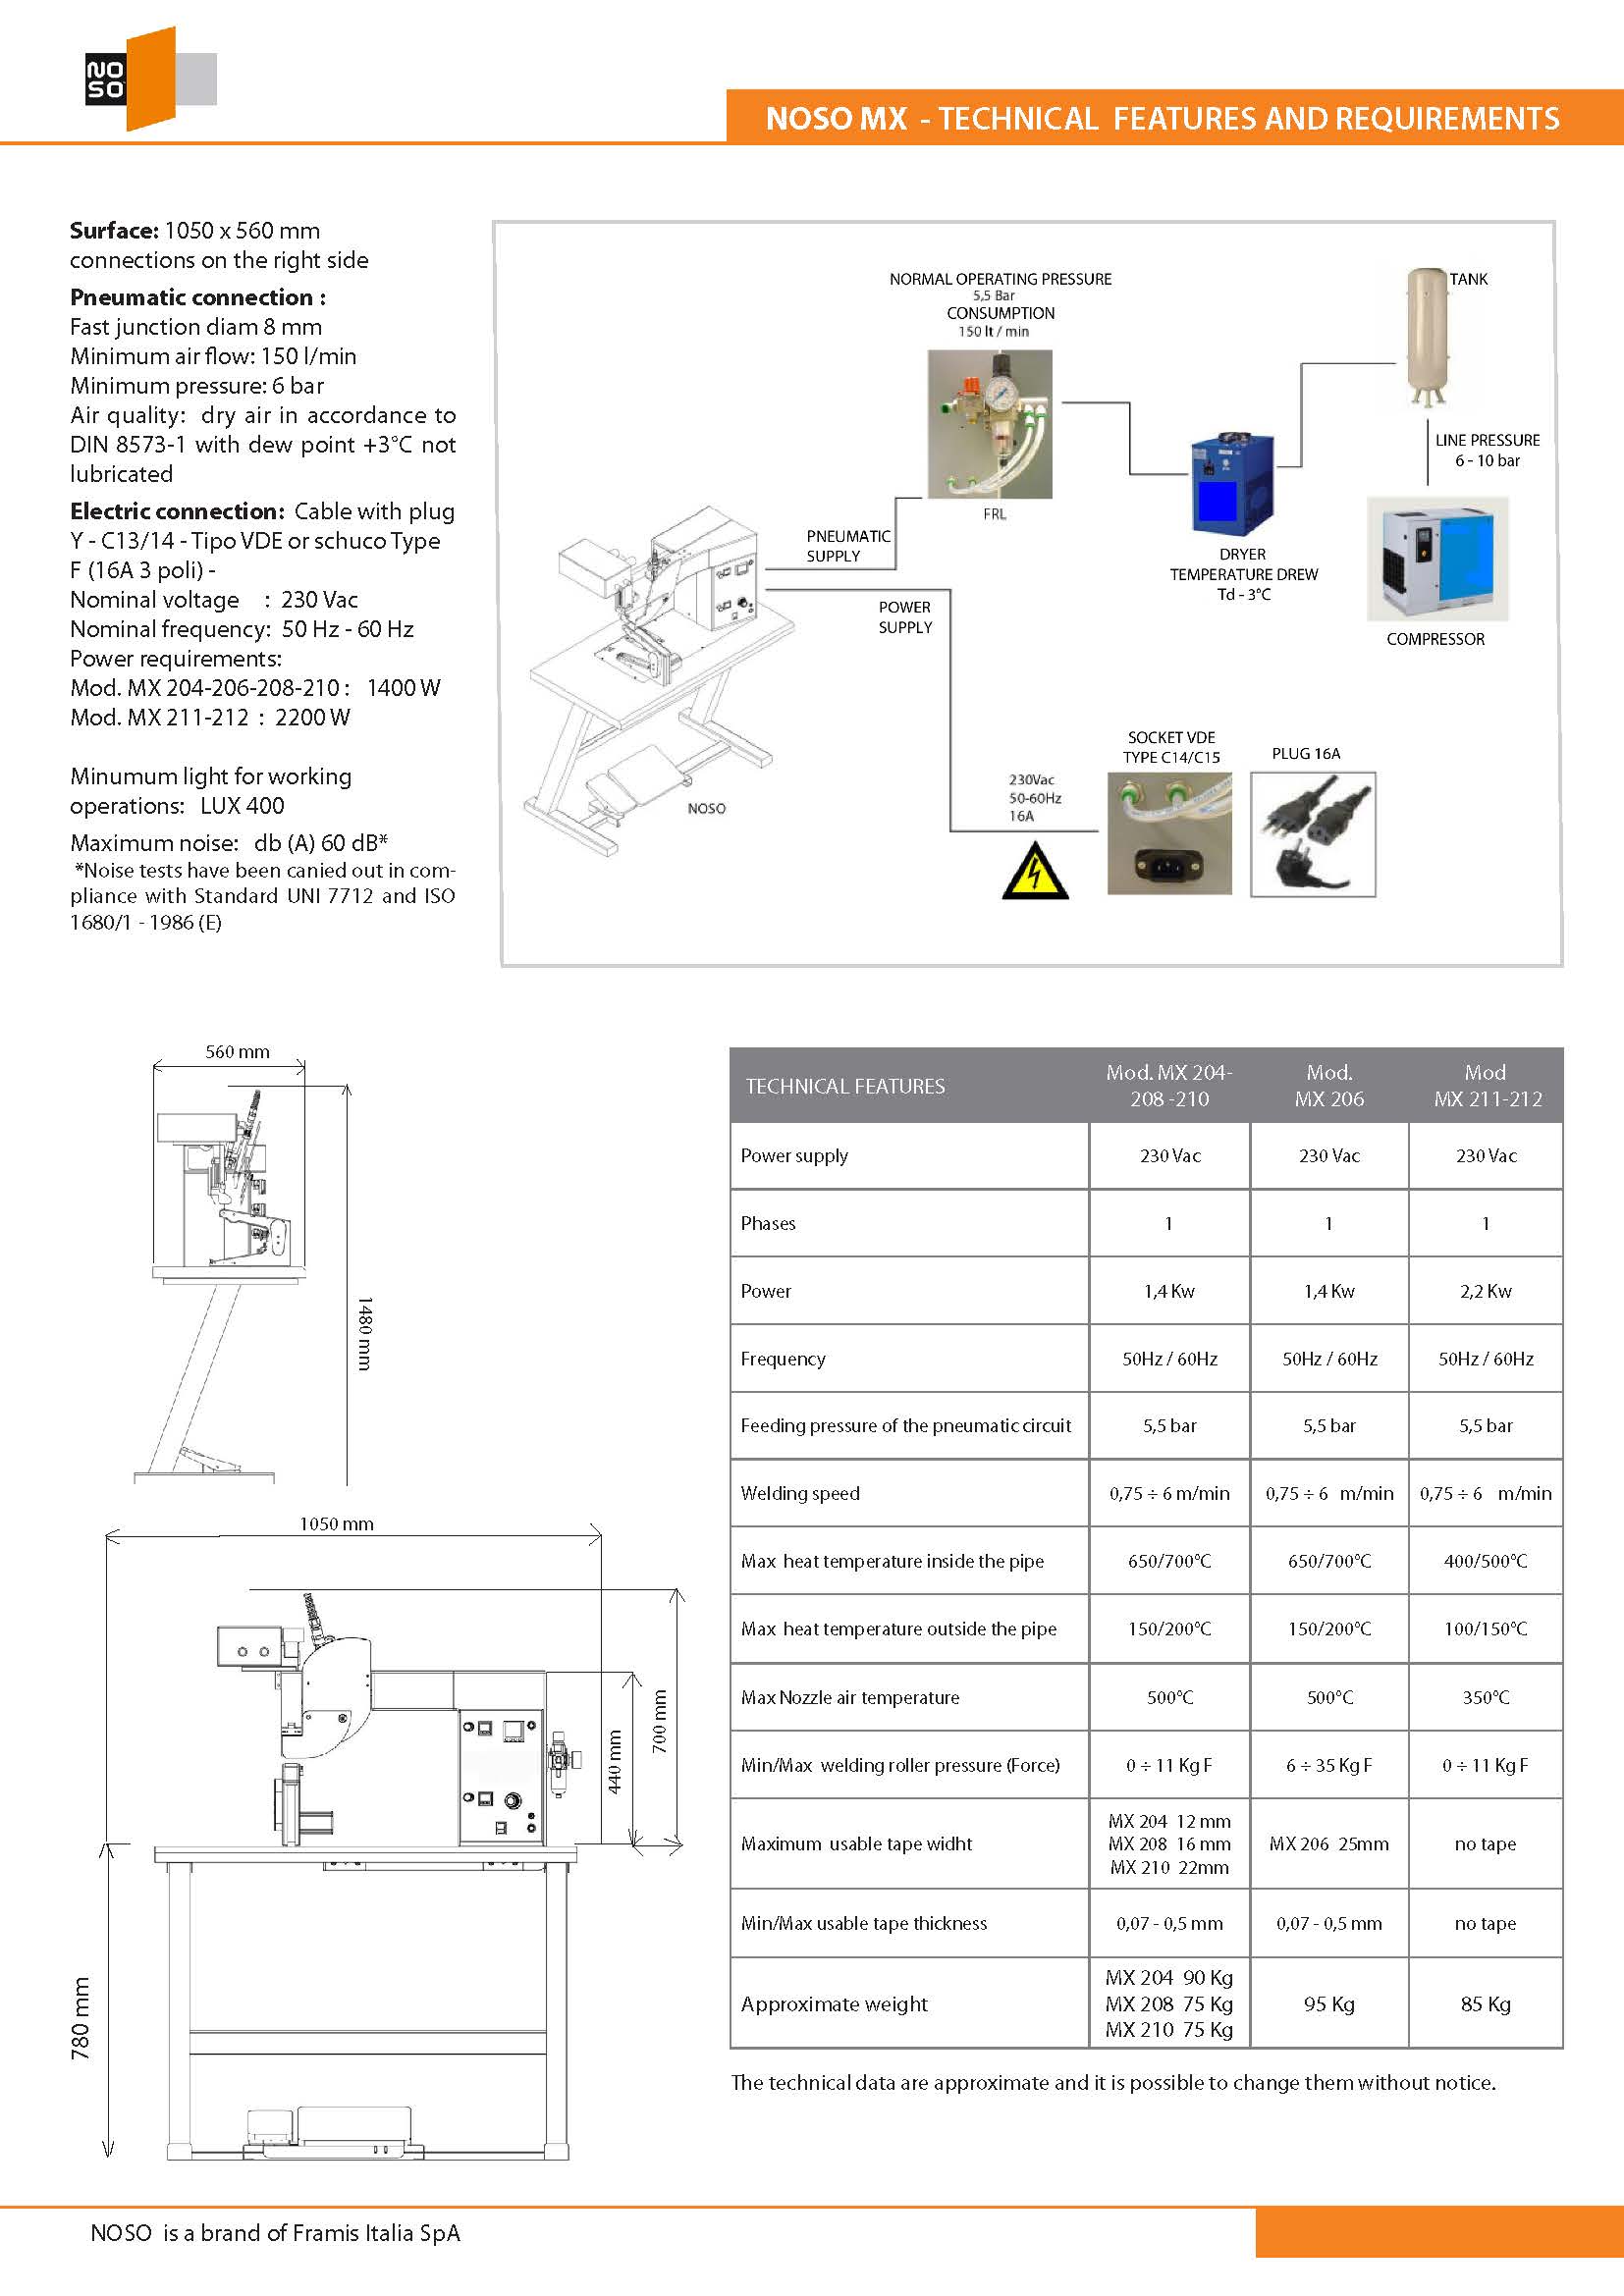 FRAMIS NOSO MACHINERY TECHNICAL REQUIREMENTS